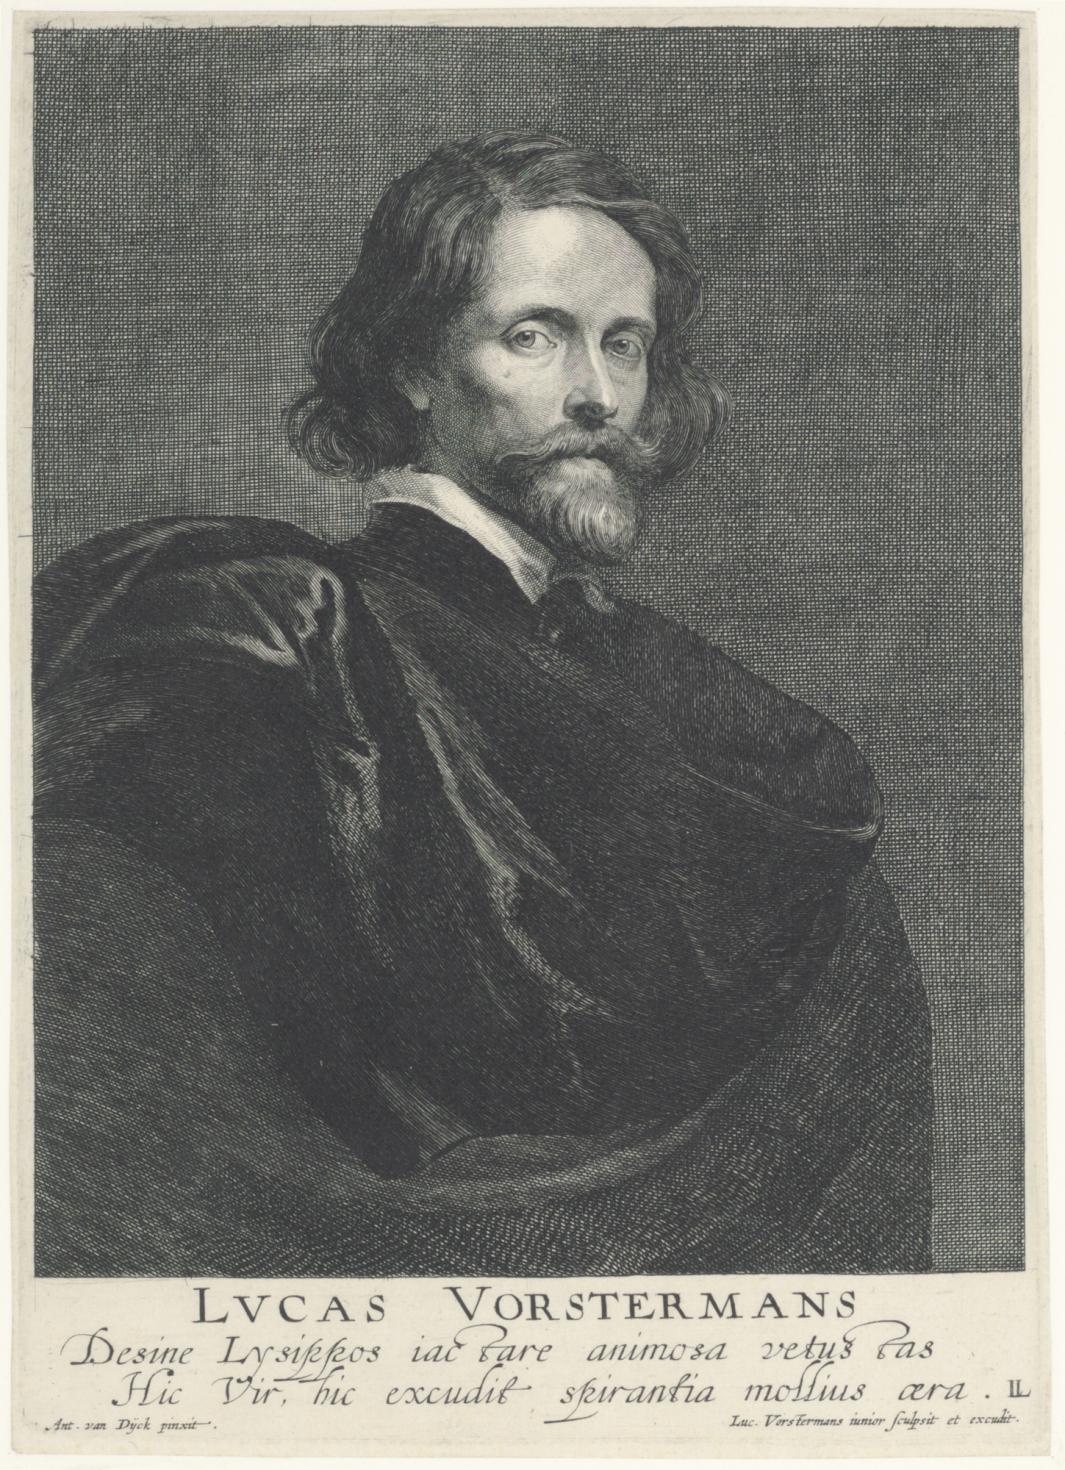 engraving of man in black cloak with mustache and beard, and caption